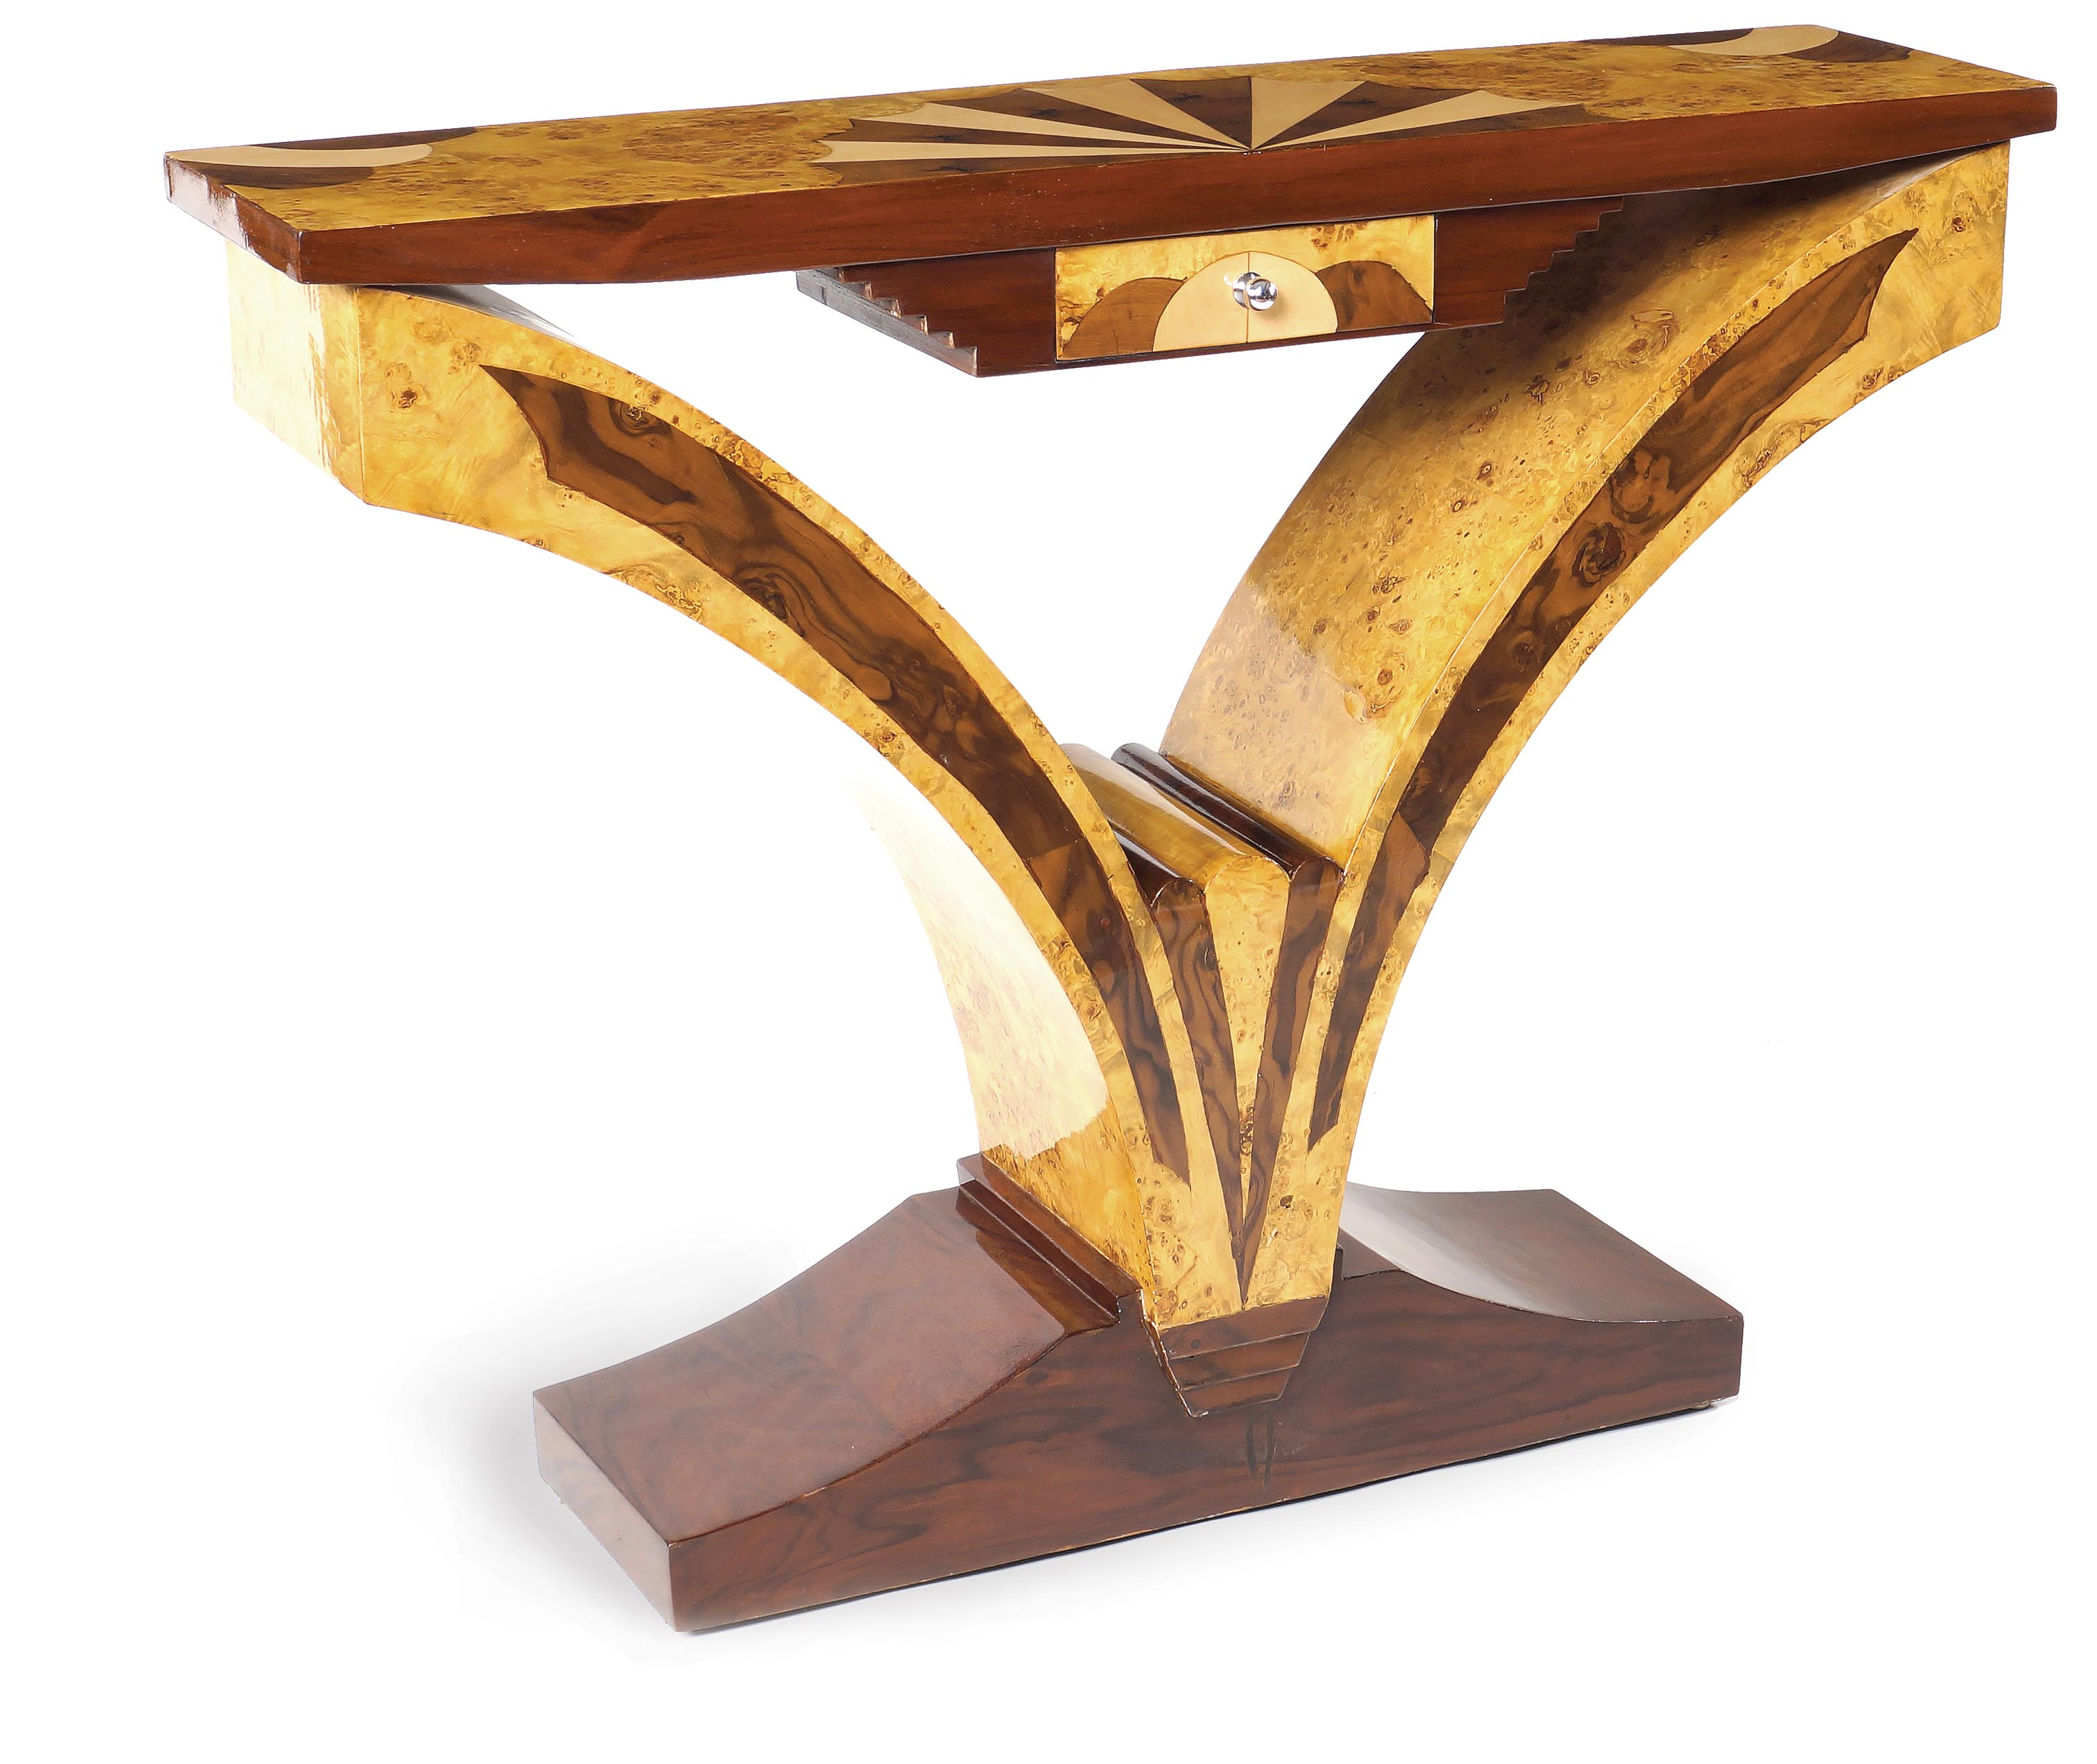 A French elm wood Deco console With walnut wood marquetry and one drawer under the rectangular